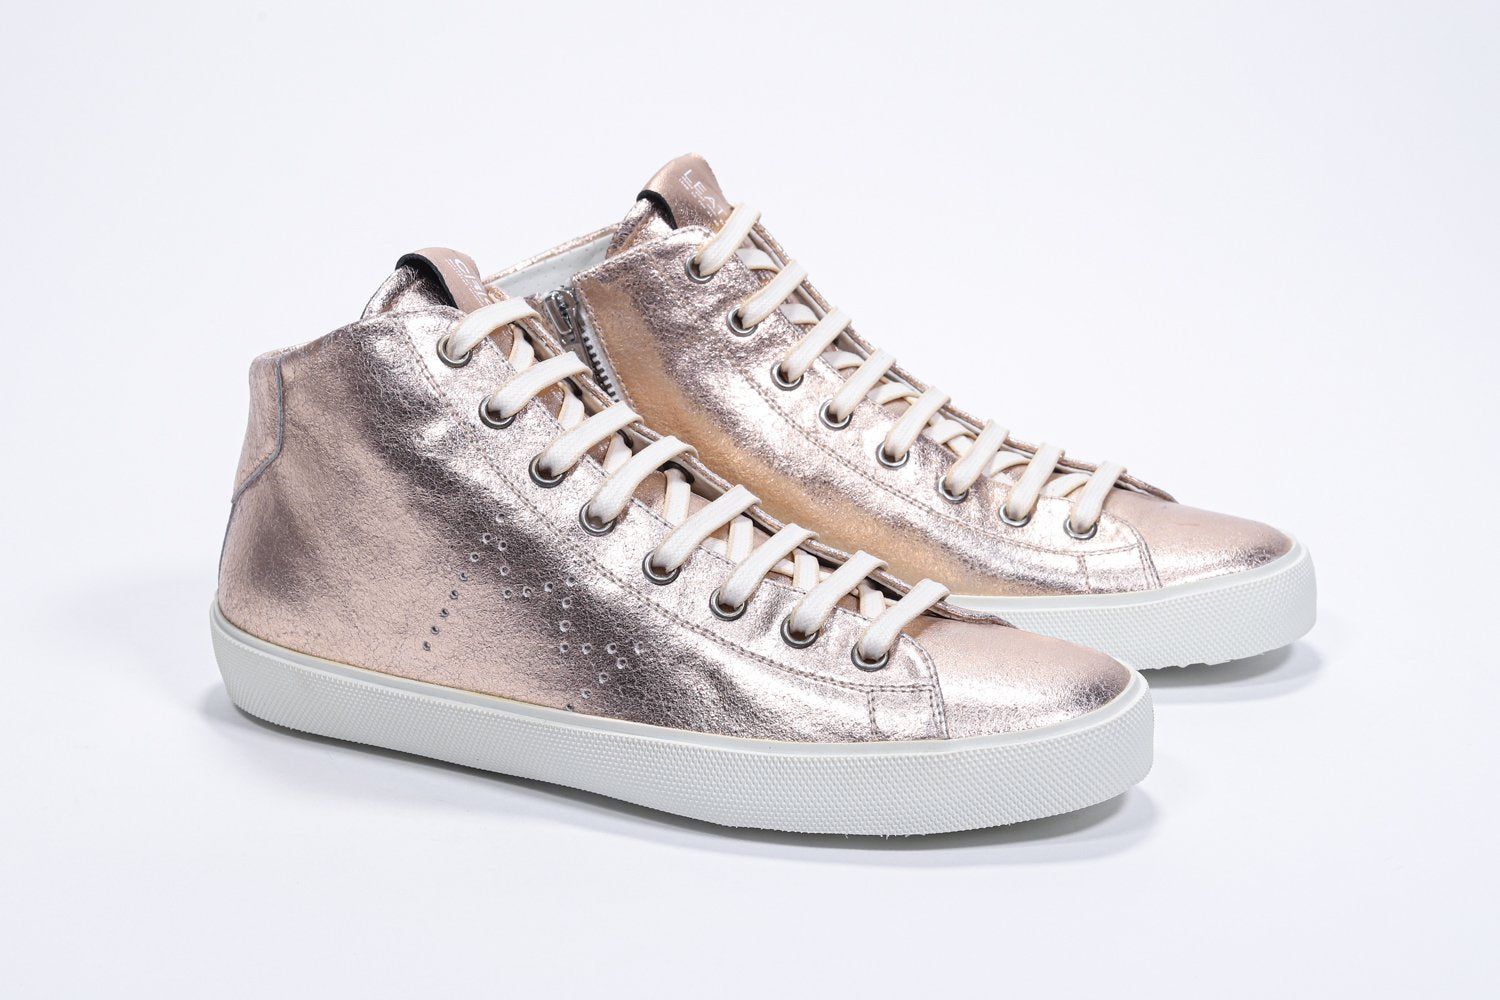 Three quarter front view of mid top rose-gold sneaker with full leather upper with perforated crown logo, internal zip and white sole.